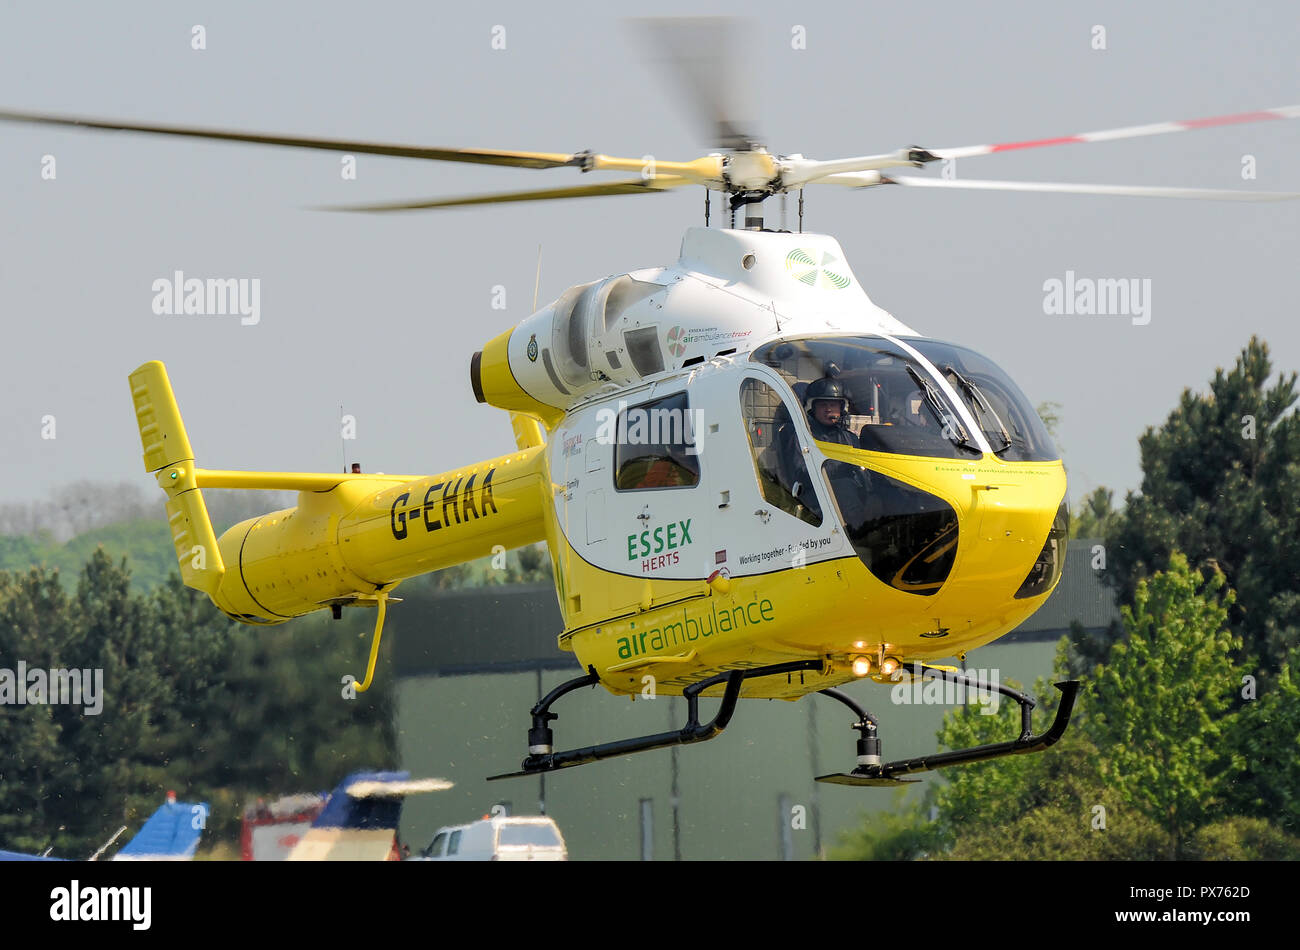 Essex and Herts Air Ambulance landing at Earls Colne. G-EHAA. MD900 Explorer helicopter, medical emergency response. Specialist Aviation Services Stock Photo